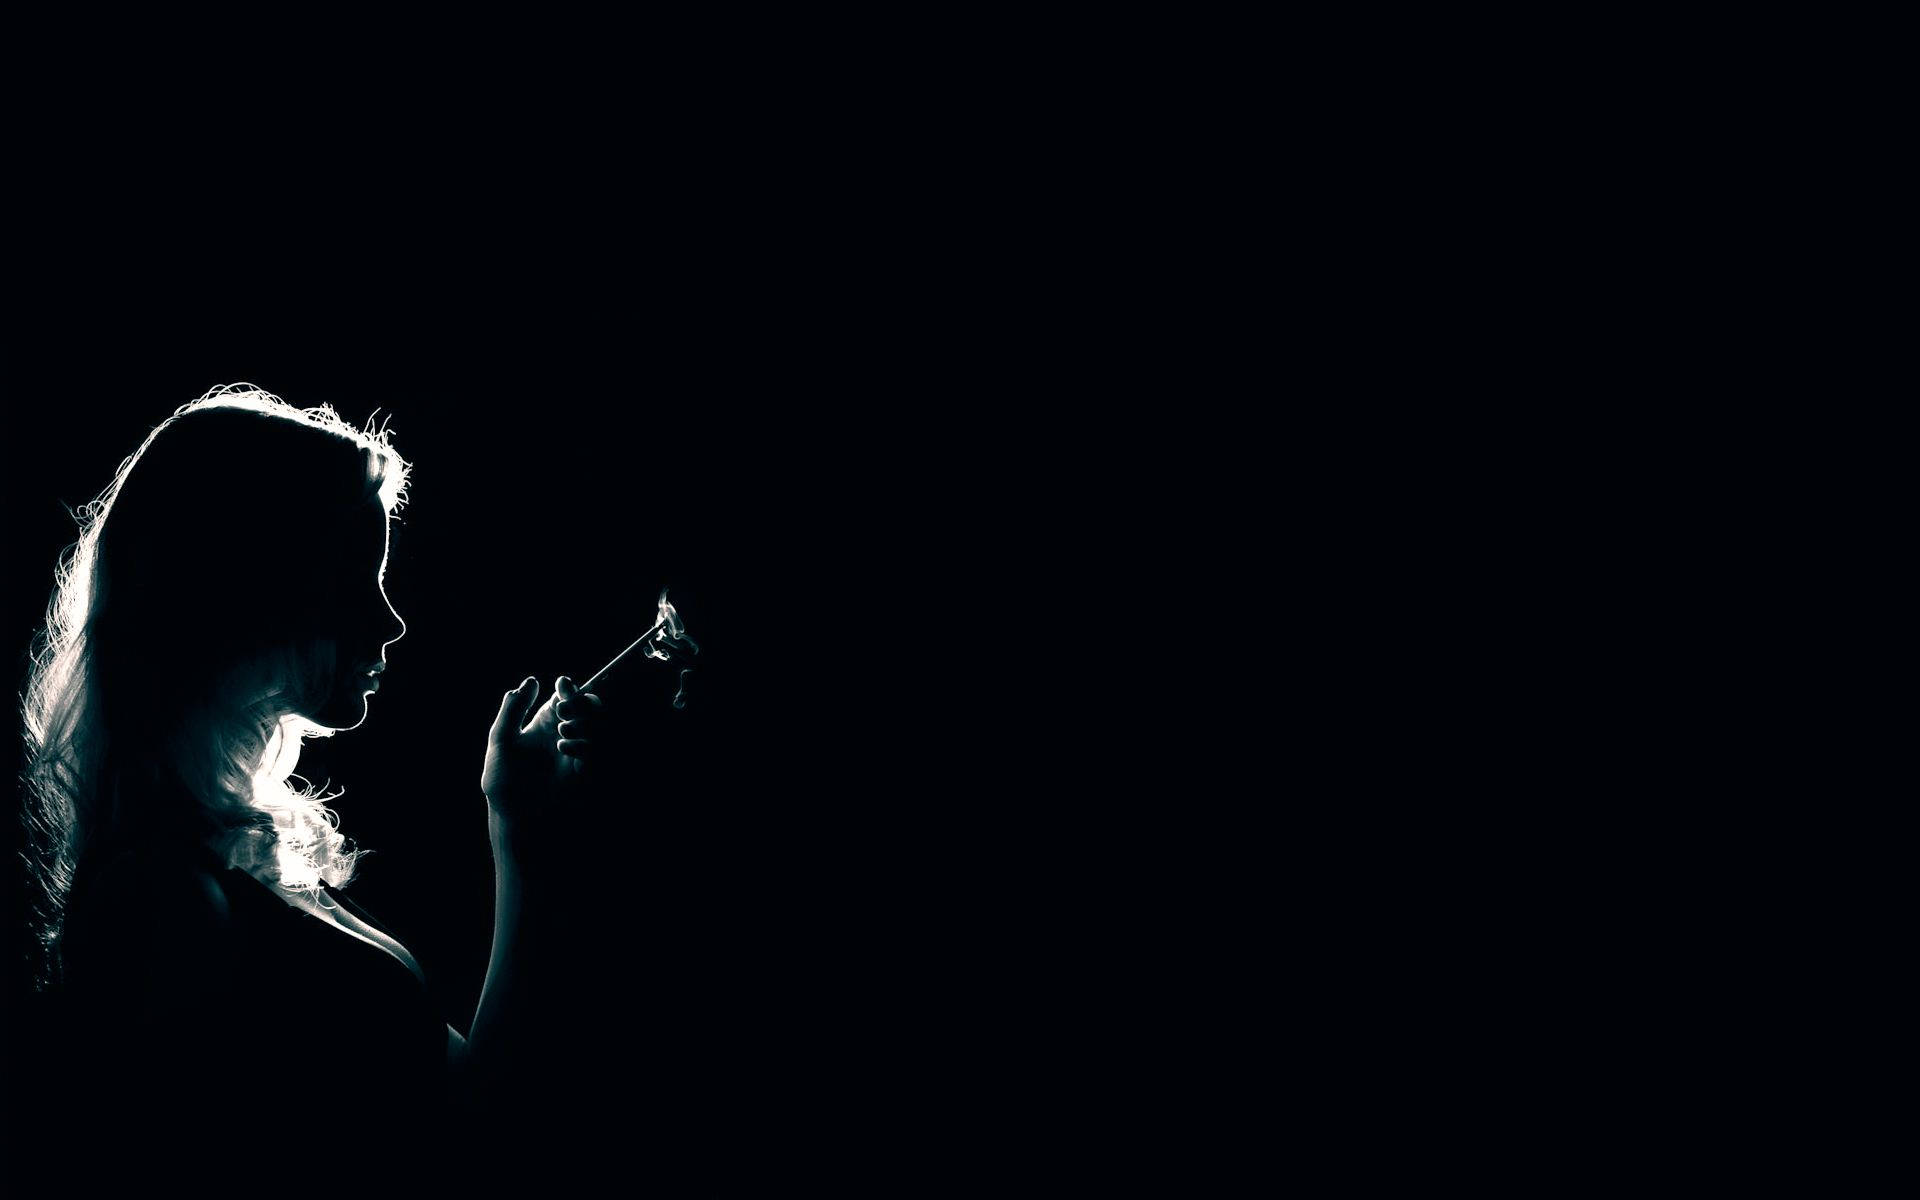 In The Shadows: Mysterious Lady Engulfed in Darkness Seeking Light Wallpaper